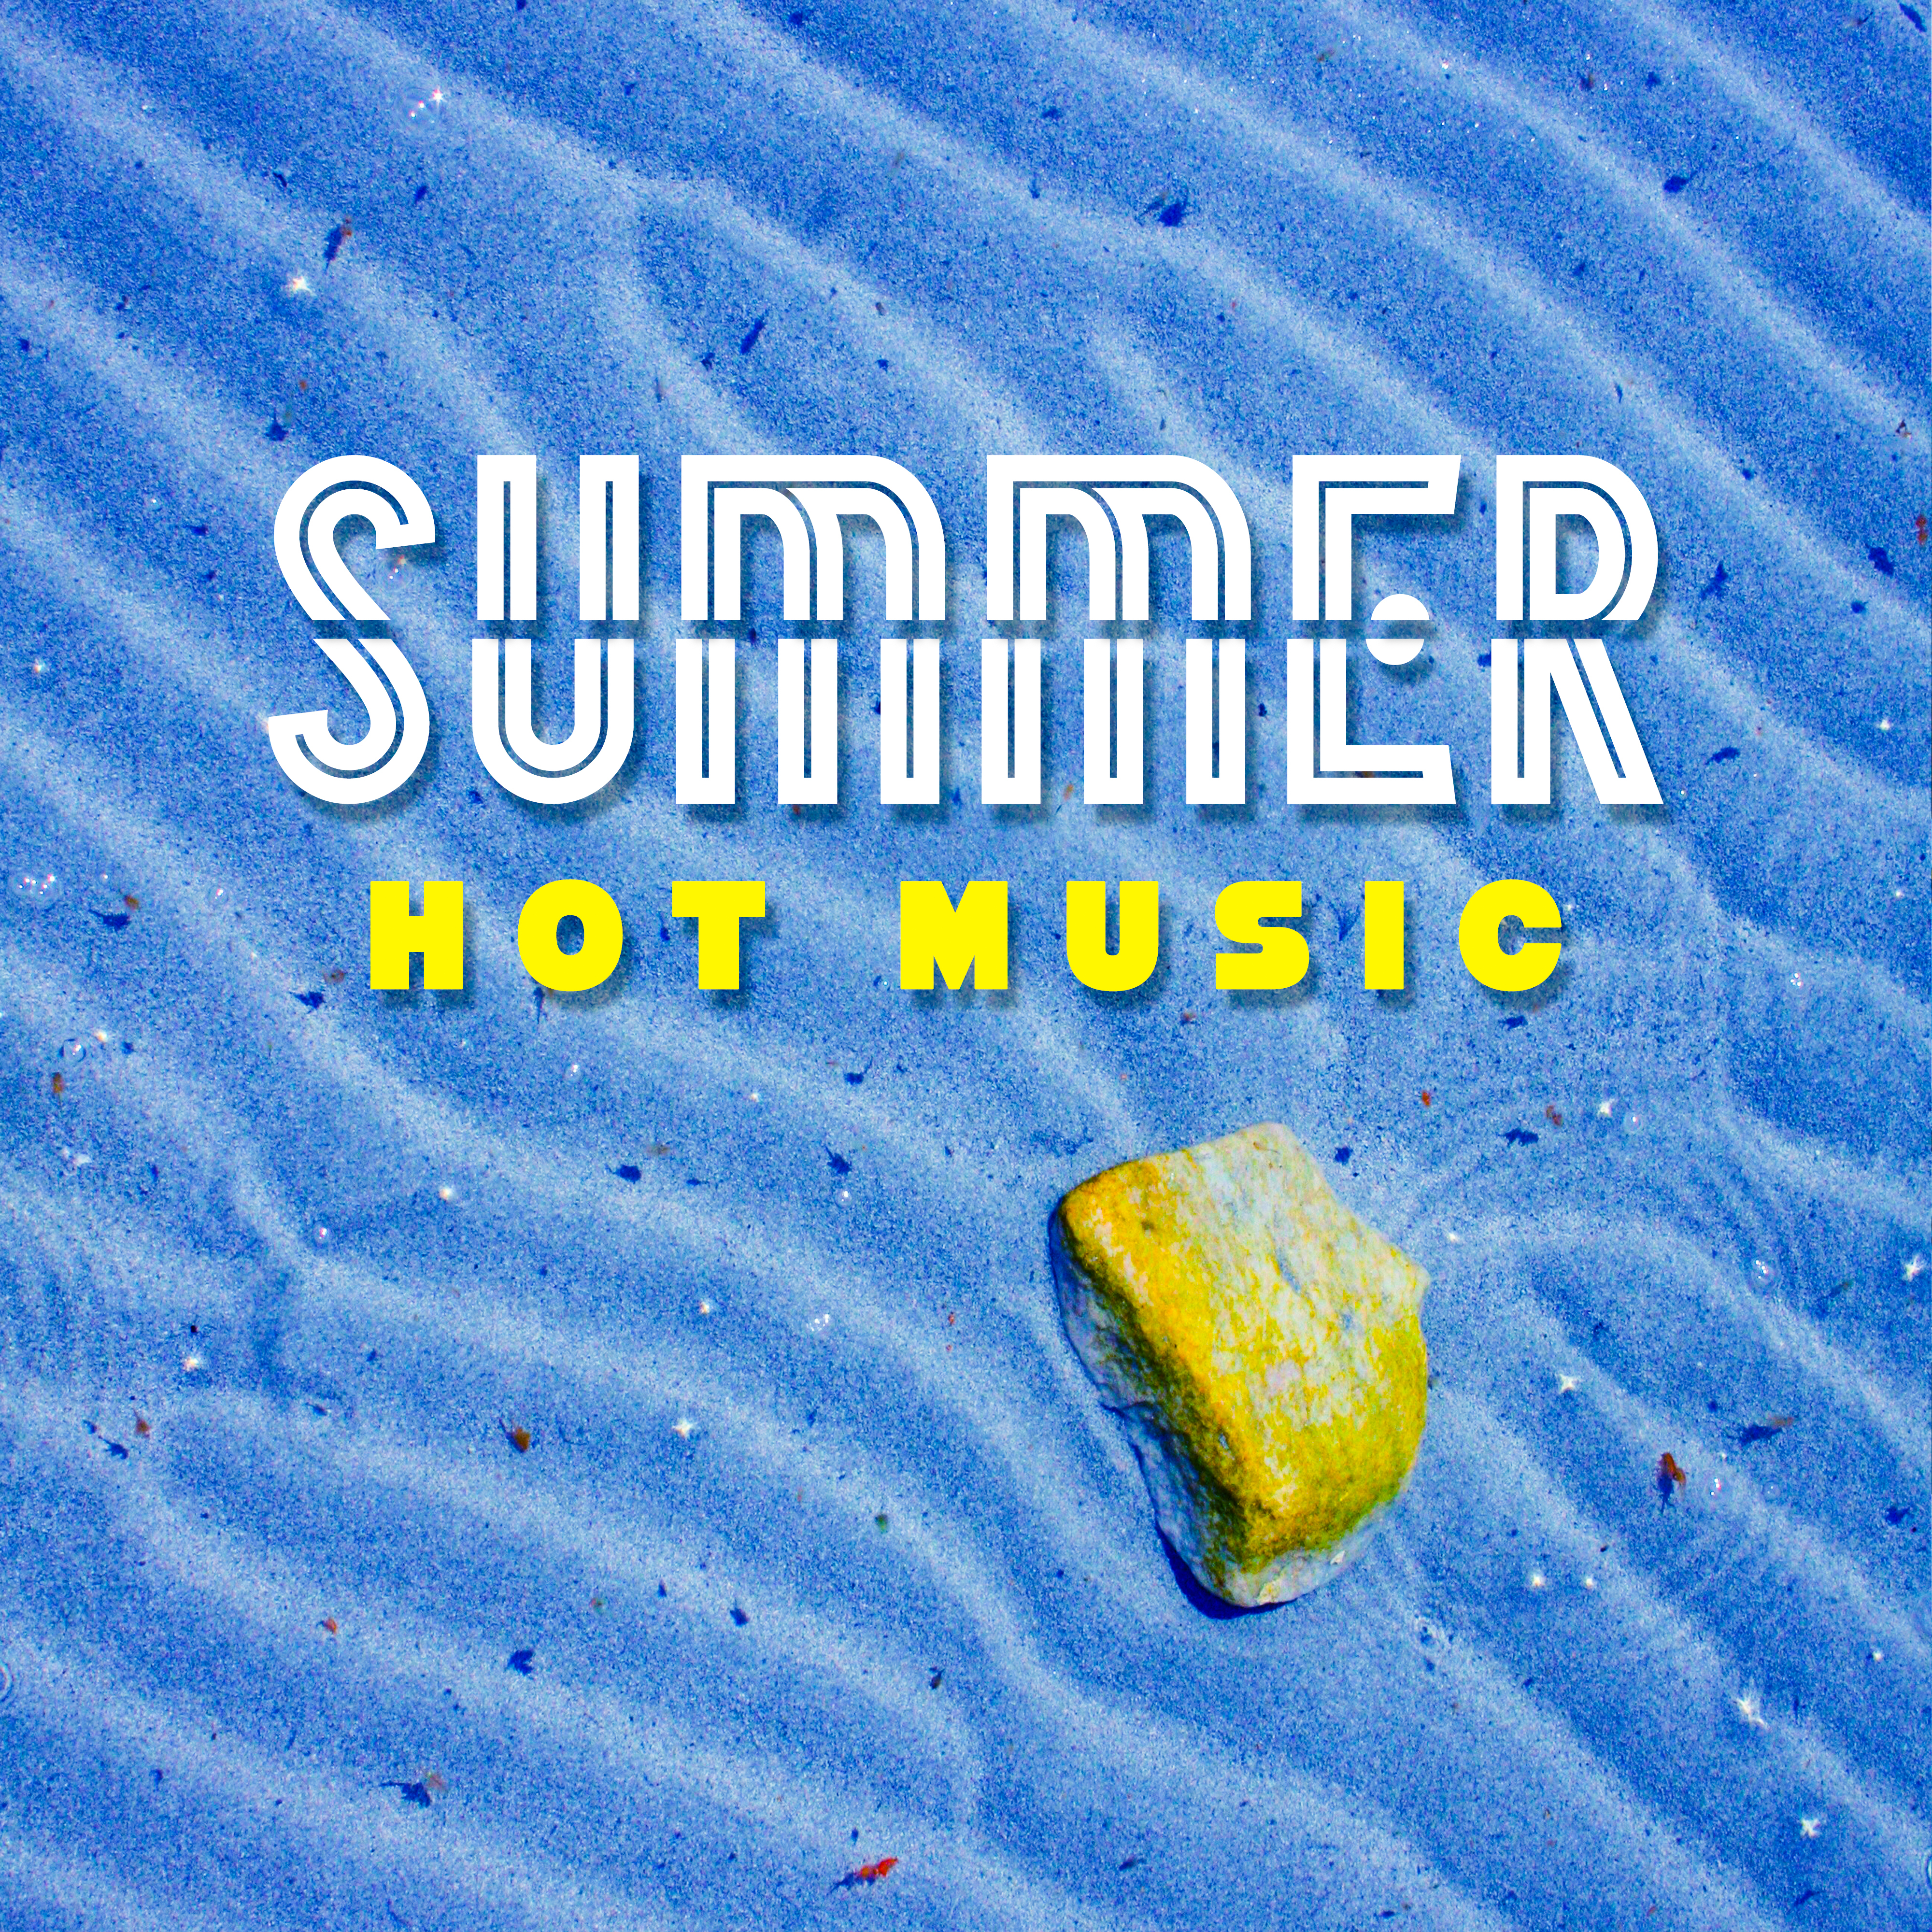 Summer Hot Music  Chillout Melodies for Party, Hot Dance Music, Sounds to Have Fun,  Moves